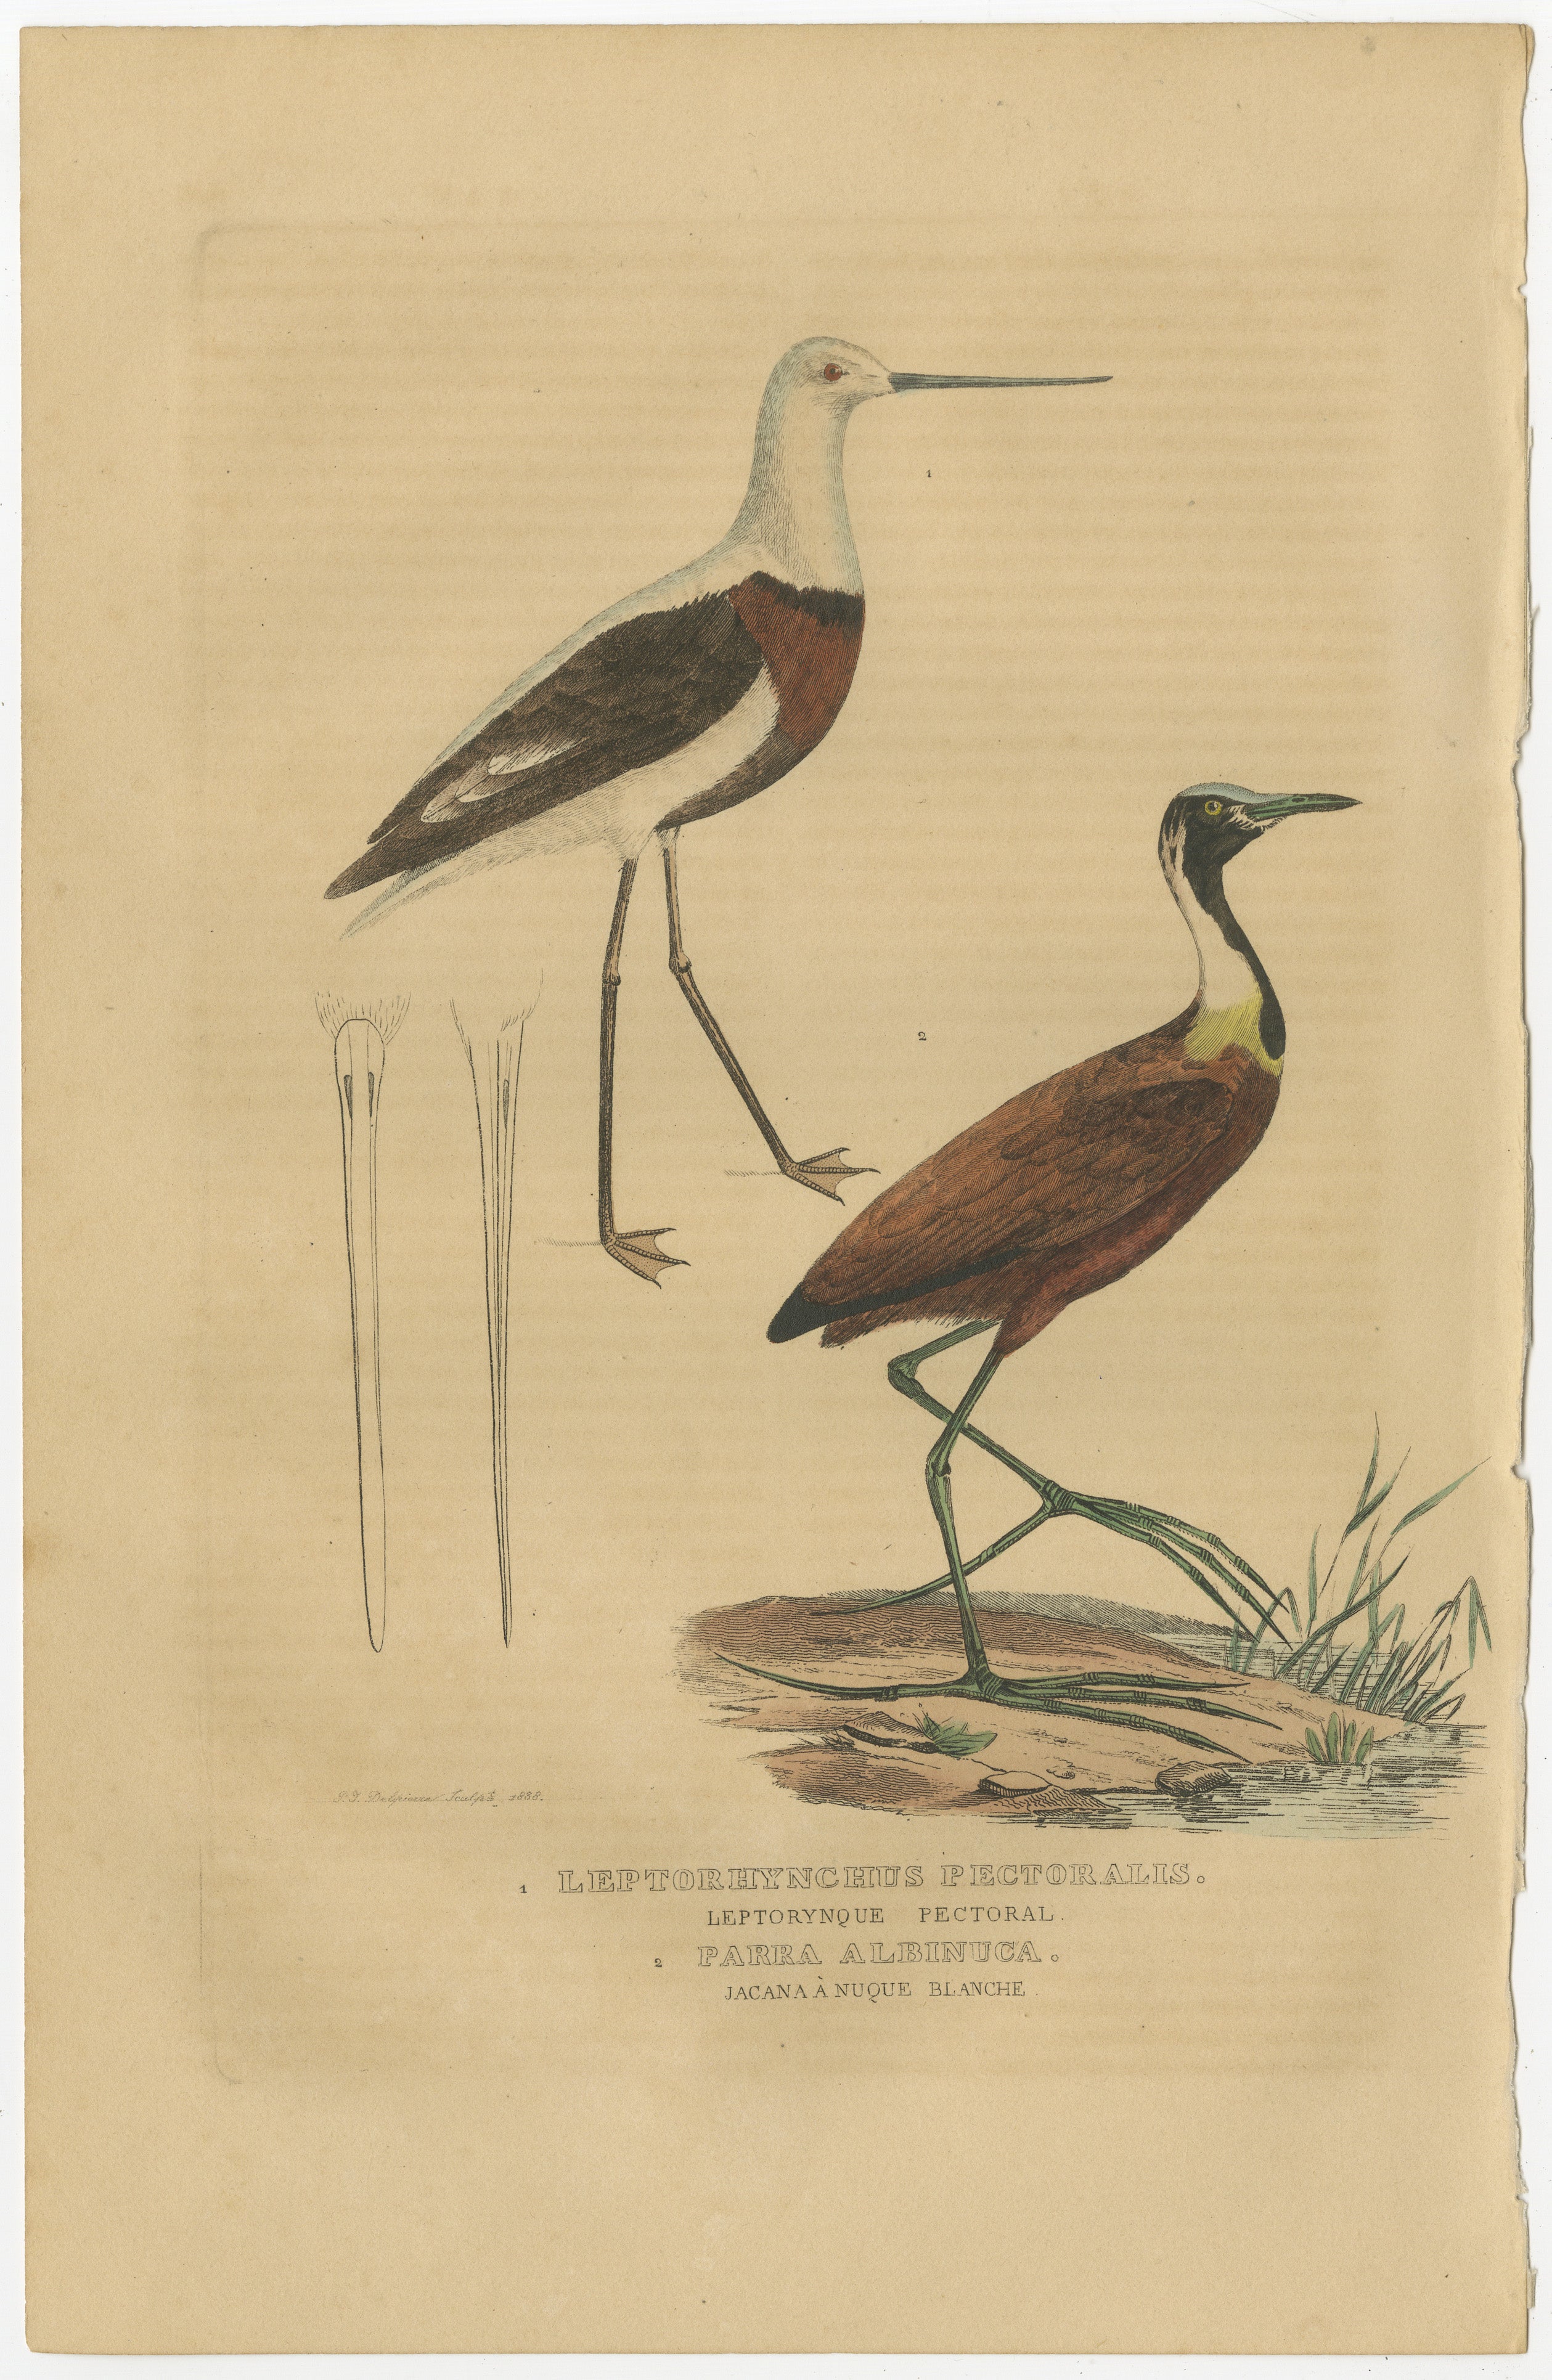 Title: ‘1. LEPTORHYNCHUS PECTORALIS – LEPTORYNQUE PECTORAL, 2. PARRA ALBINUCA – JACANA A NUQUE BLANCHE.’
– (1. Banded Stilt, 2. Madagascar Jacana.)

Engraving with original hand colouring, heightened with arabic gum on wove (vellin) paper.

An